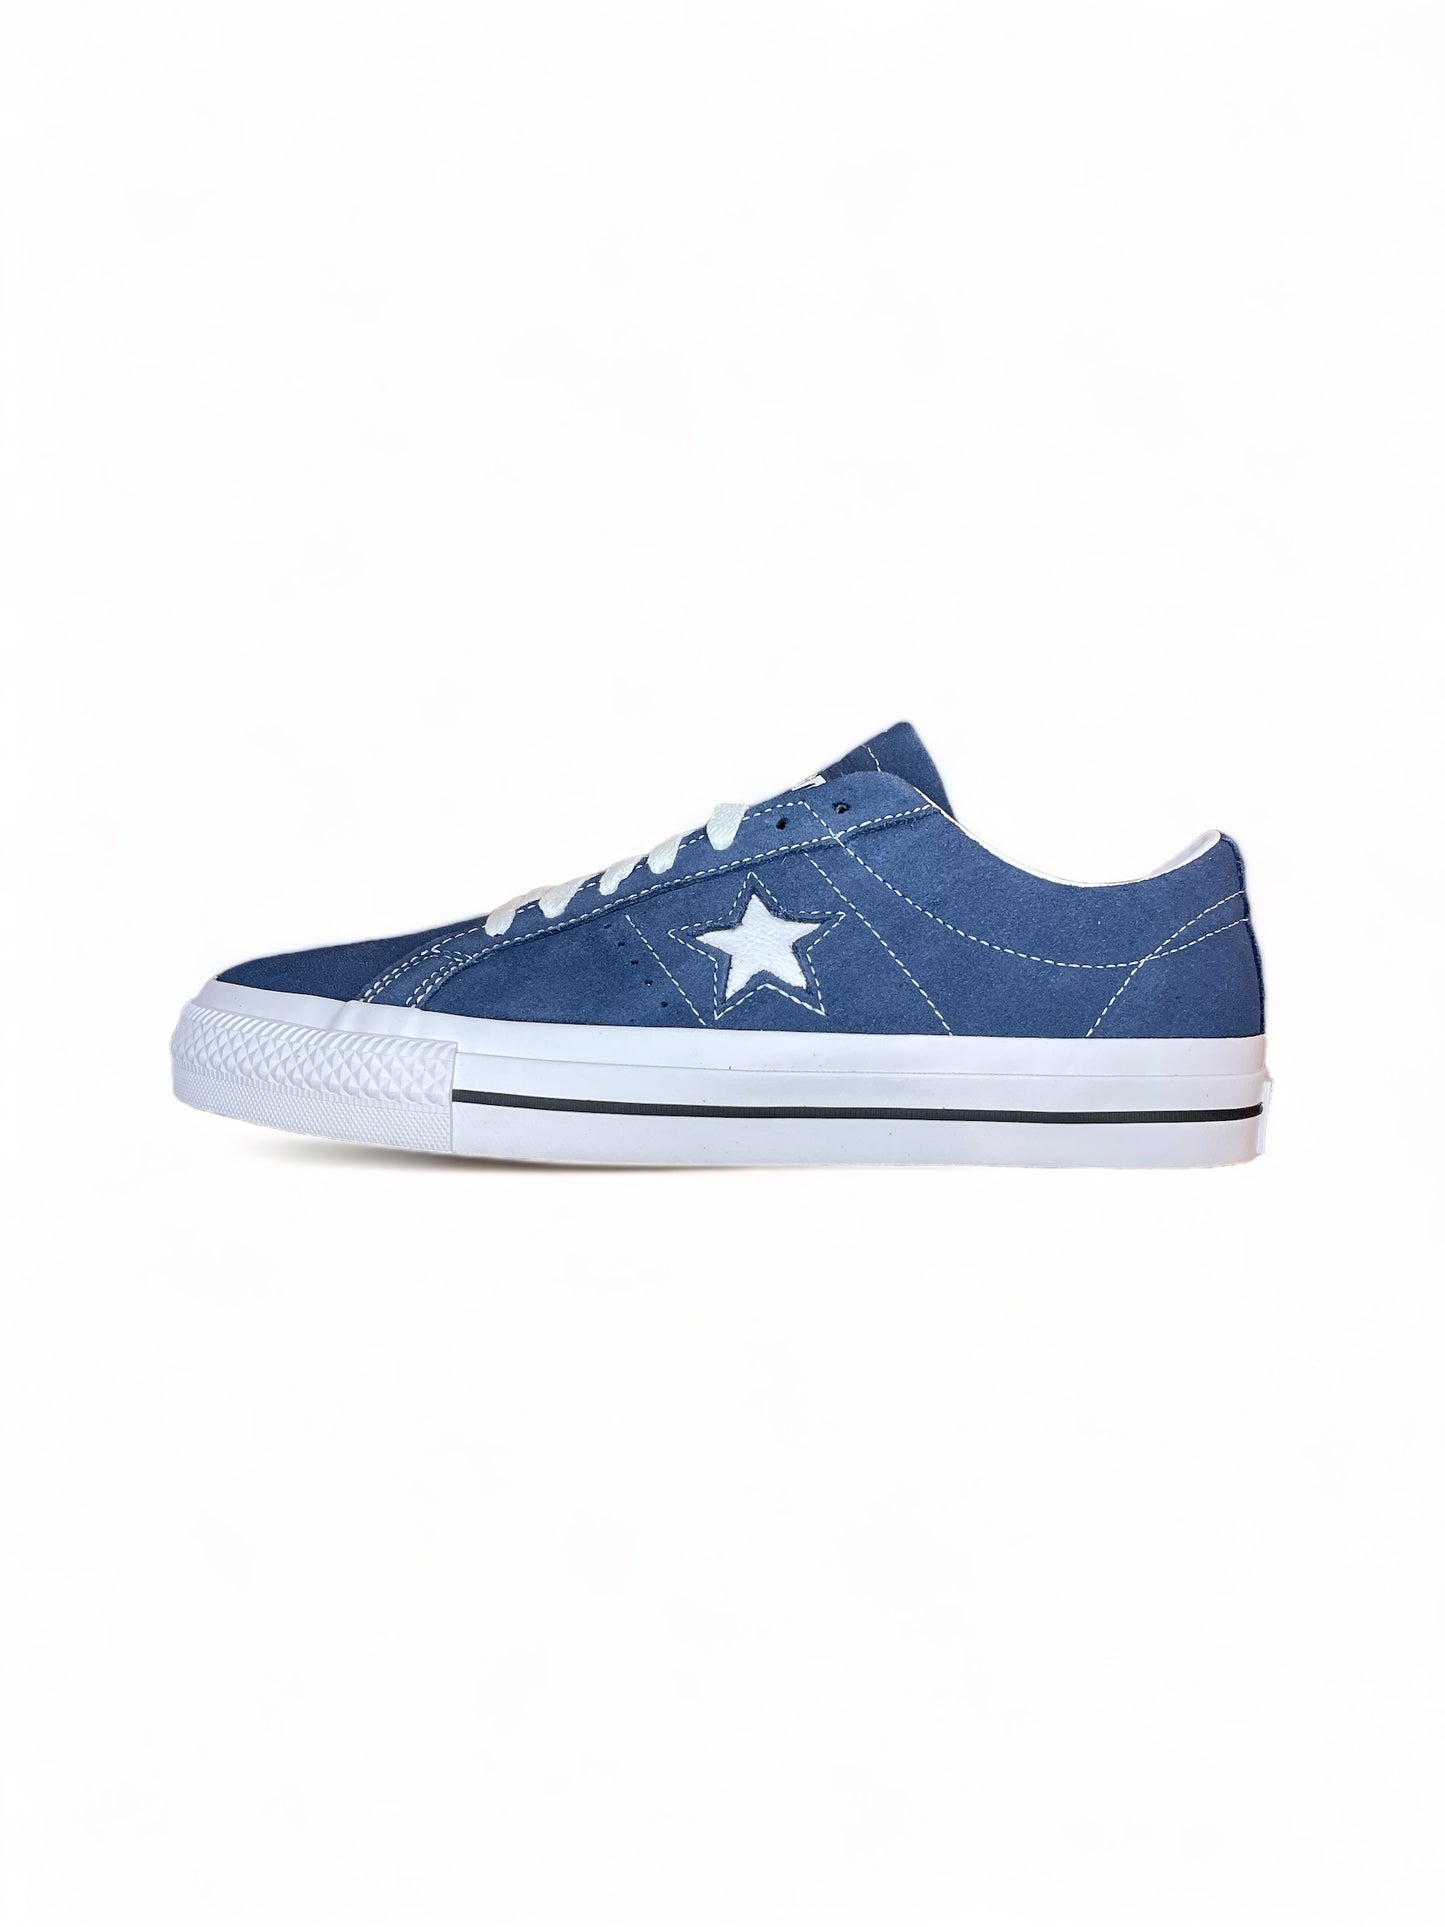 Converse One Star Pro Ox (Navy/White)